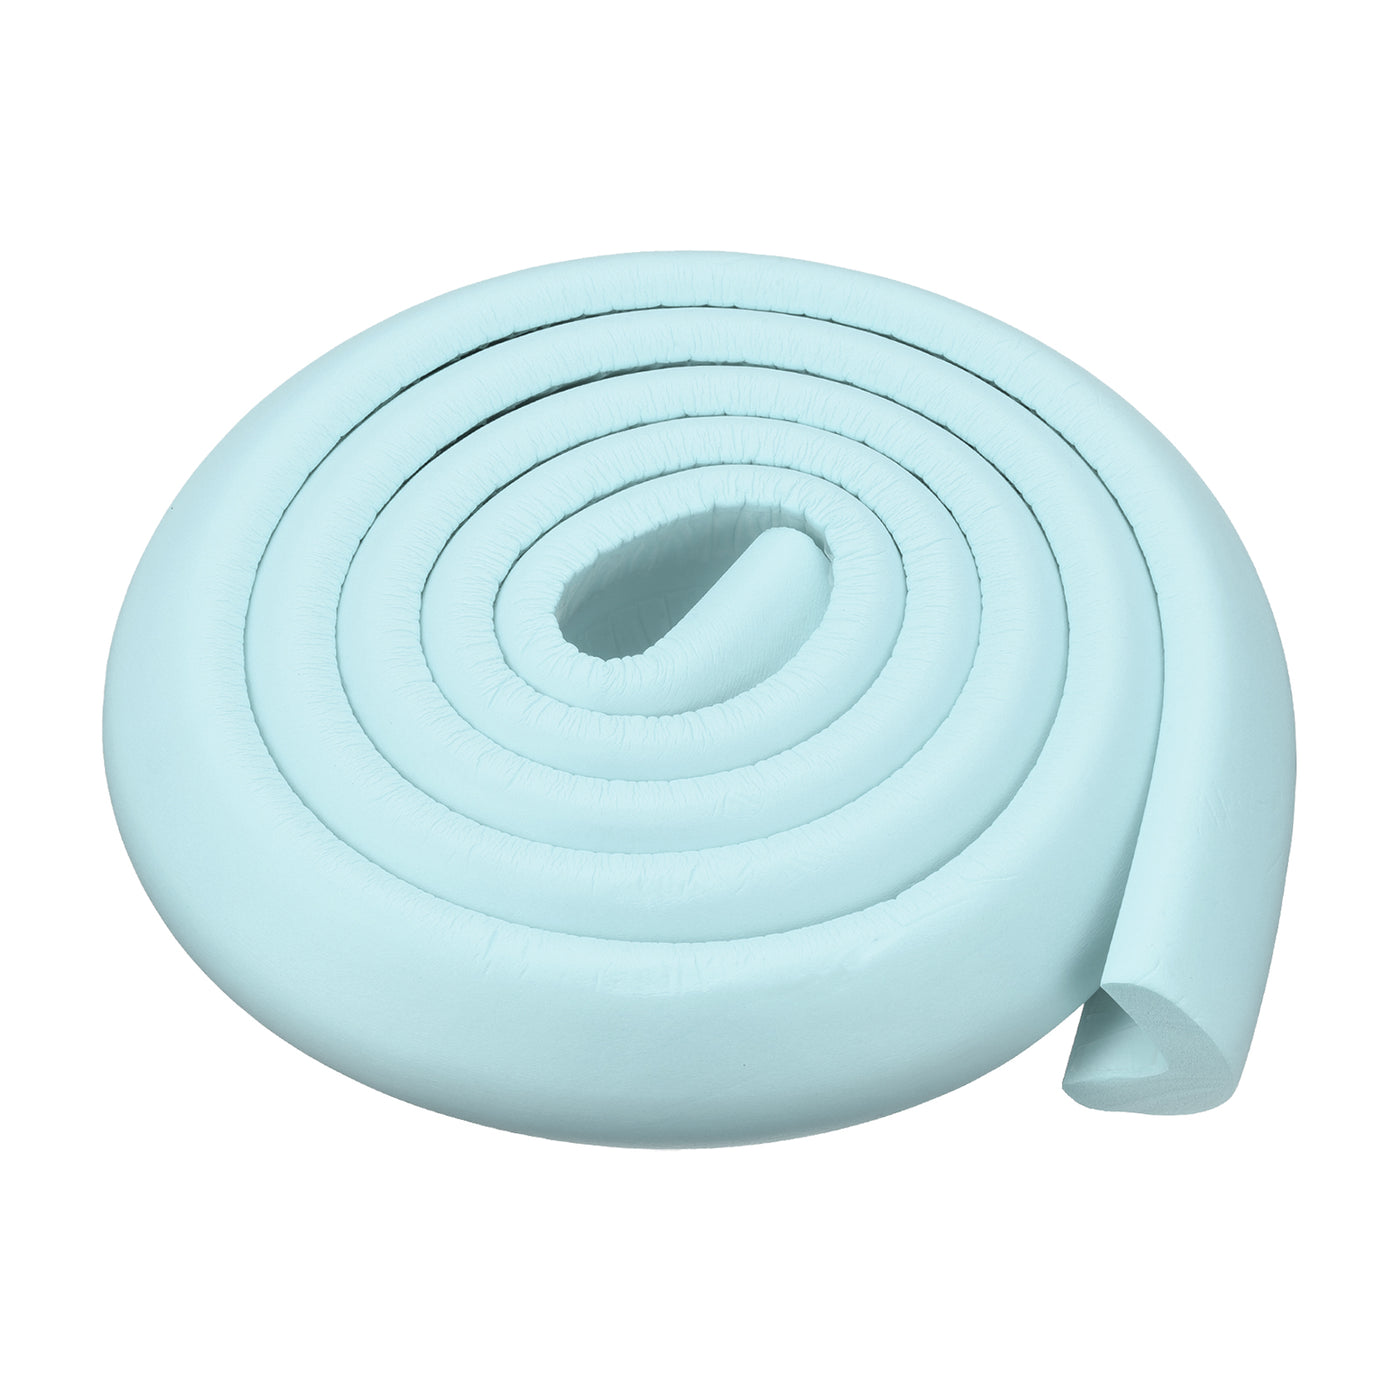 uxcell Uxcell Corner Guards Edge Protectors 6.56ft(2M), Foam Safety Bumper Light Blue